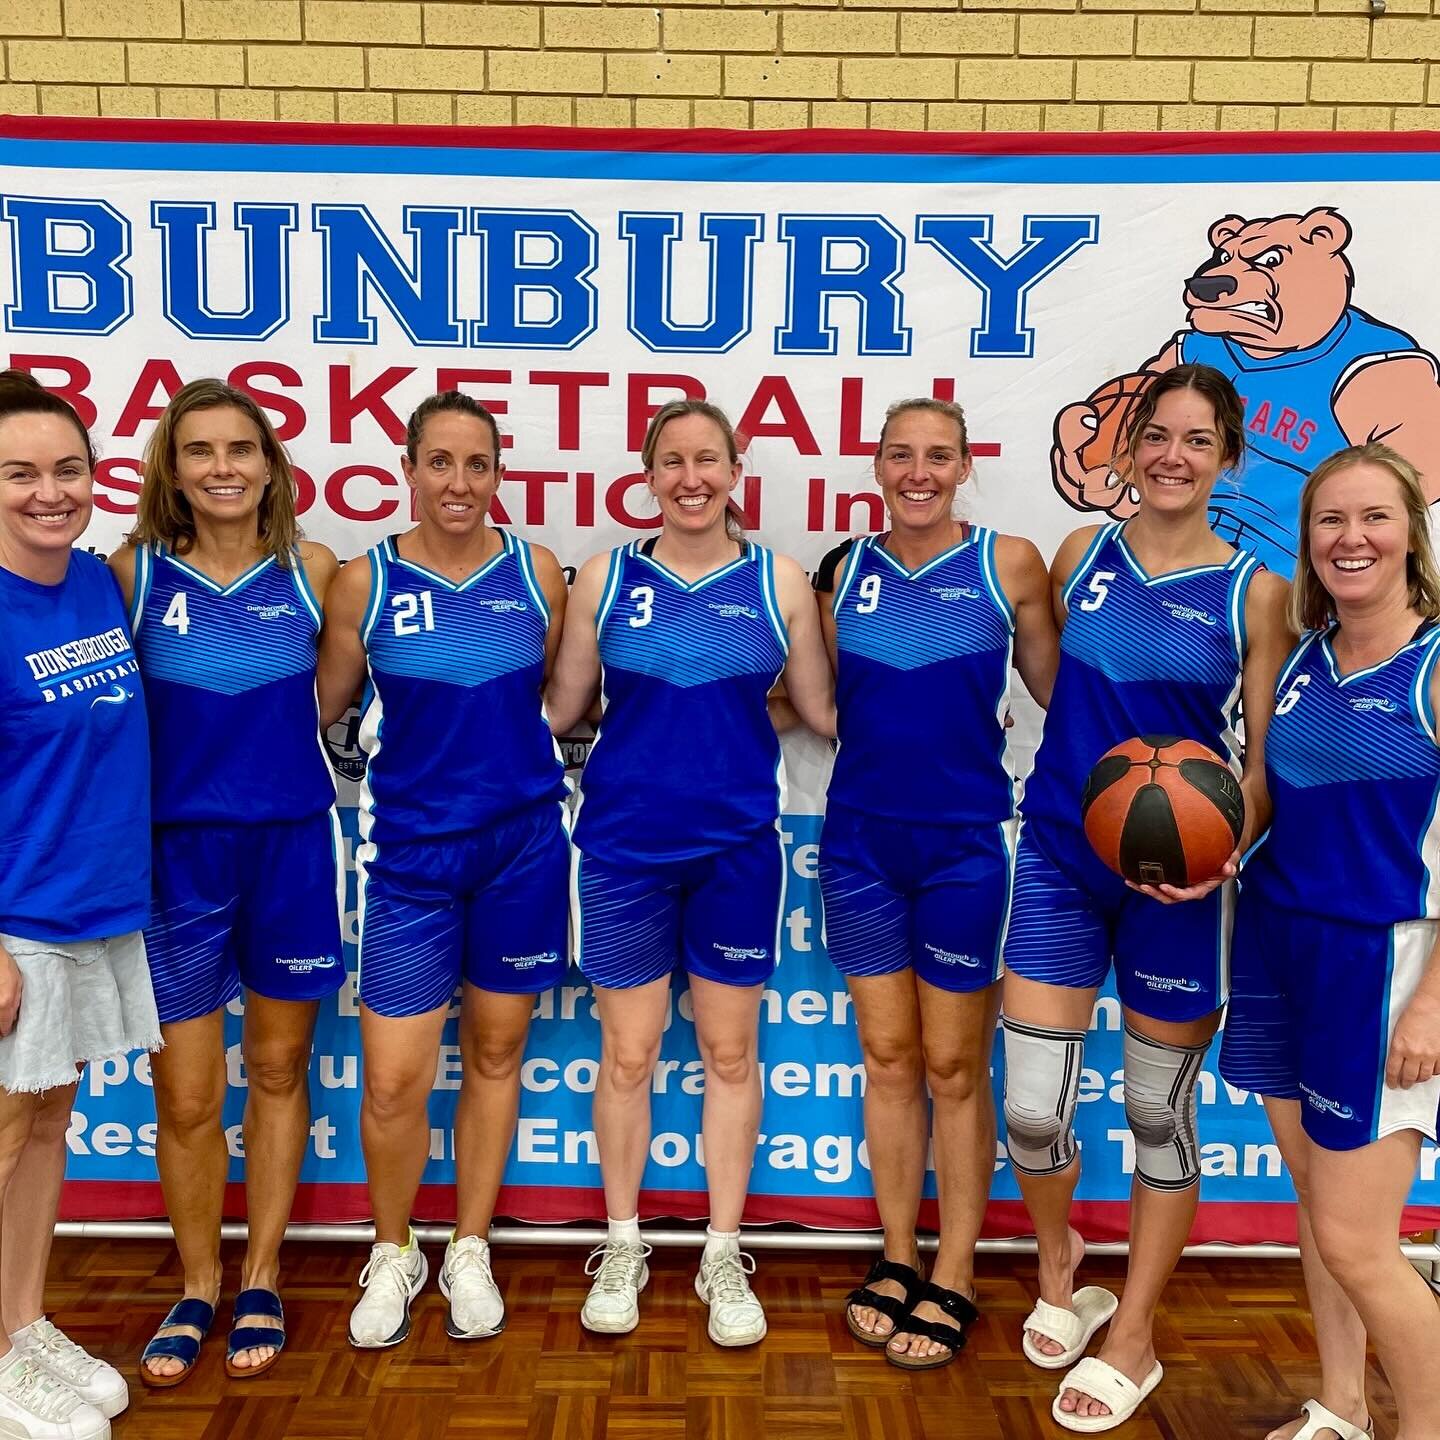 The Bunbury Basketball Association Master&rsquo;s was held over the long weekend. 

Both men&rsquo;s and women&rsquo;s Dunsborough teams made it to the Grand Final! Congratulations to the women who won by 1 and men who narrowly lost by 1.